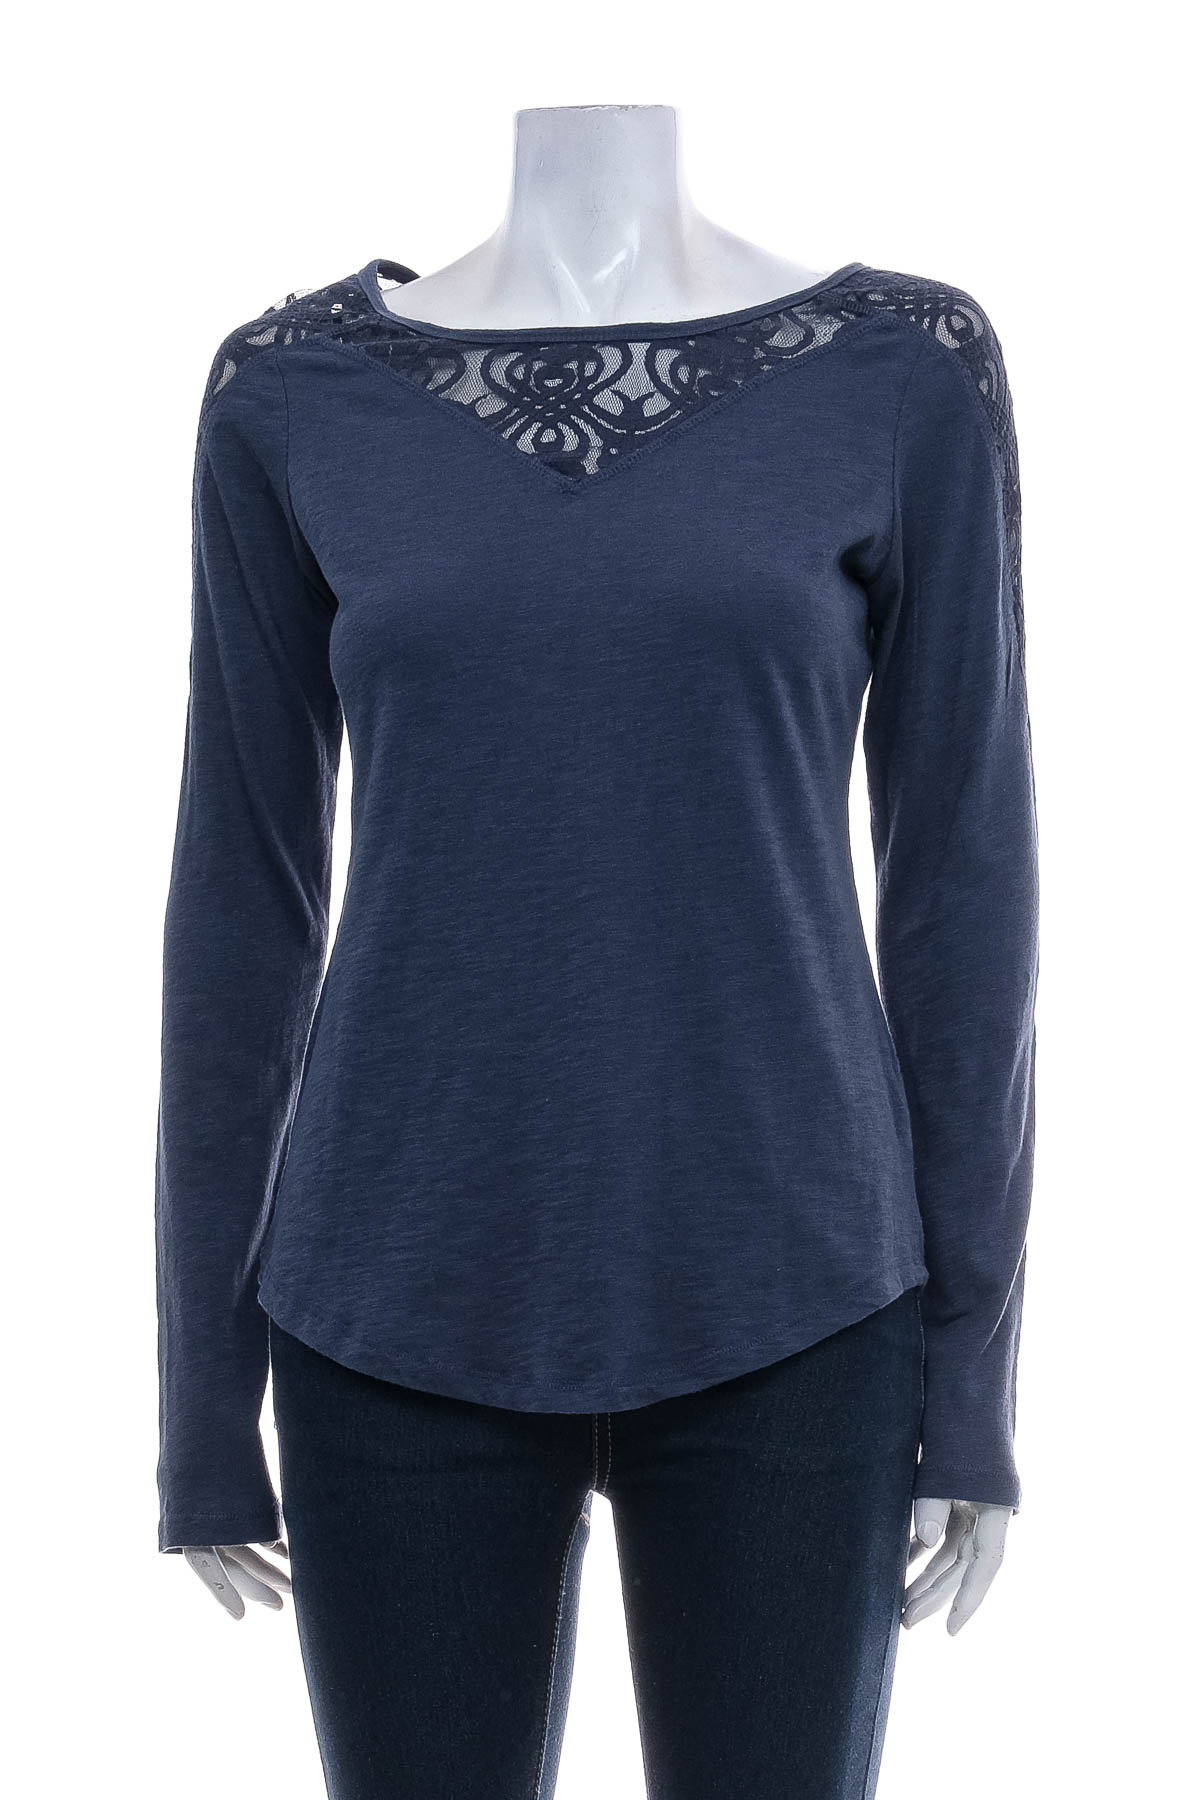 Women's blouse - Maurices - 0